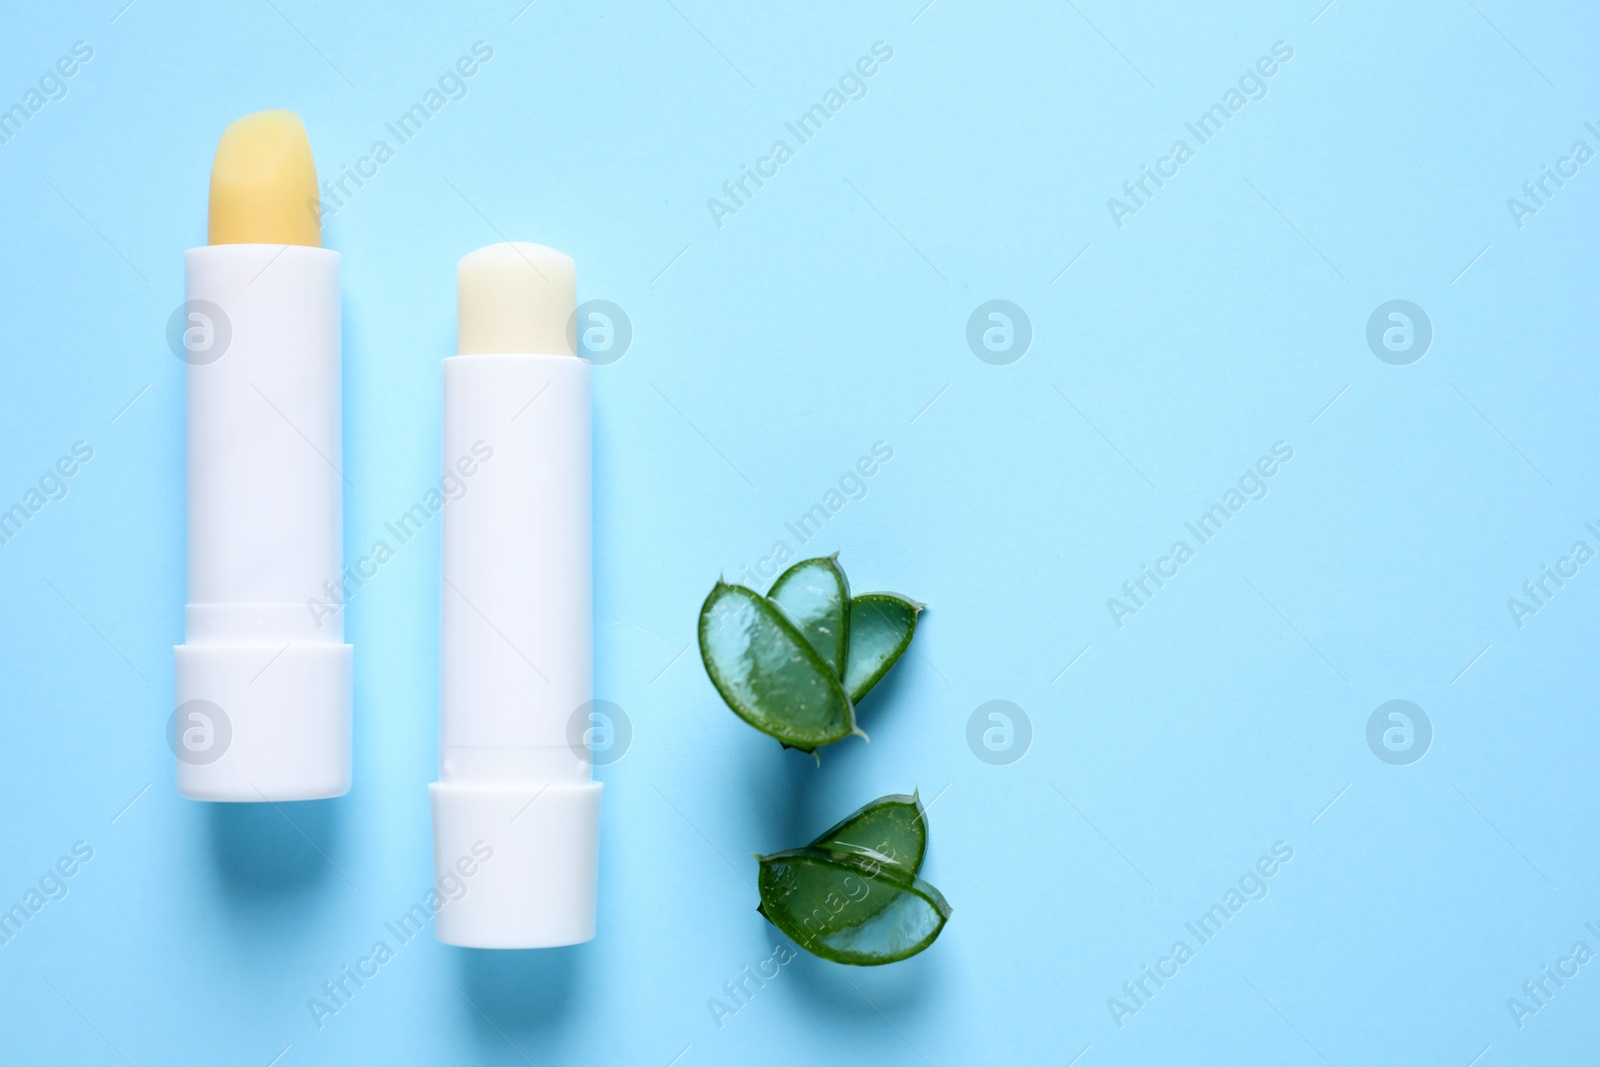 Photo of Hygienic lipsticks and cut aloe vera leaf on light blue background, flat lay. Space for text